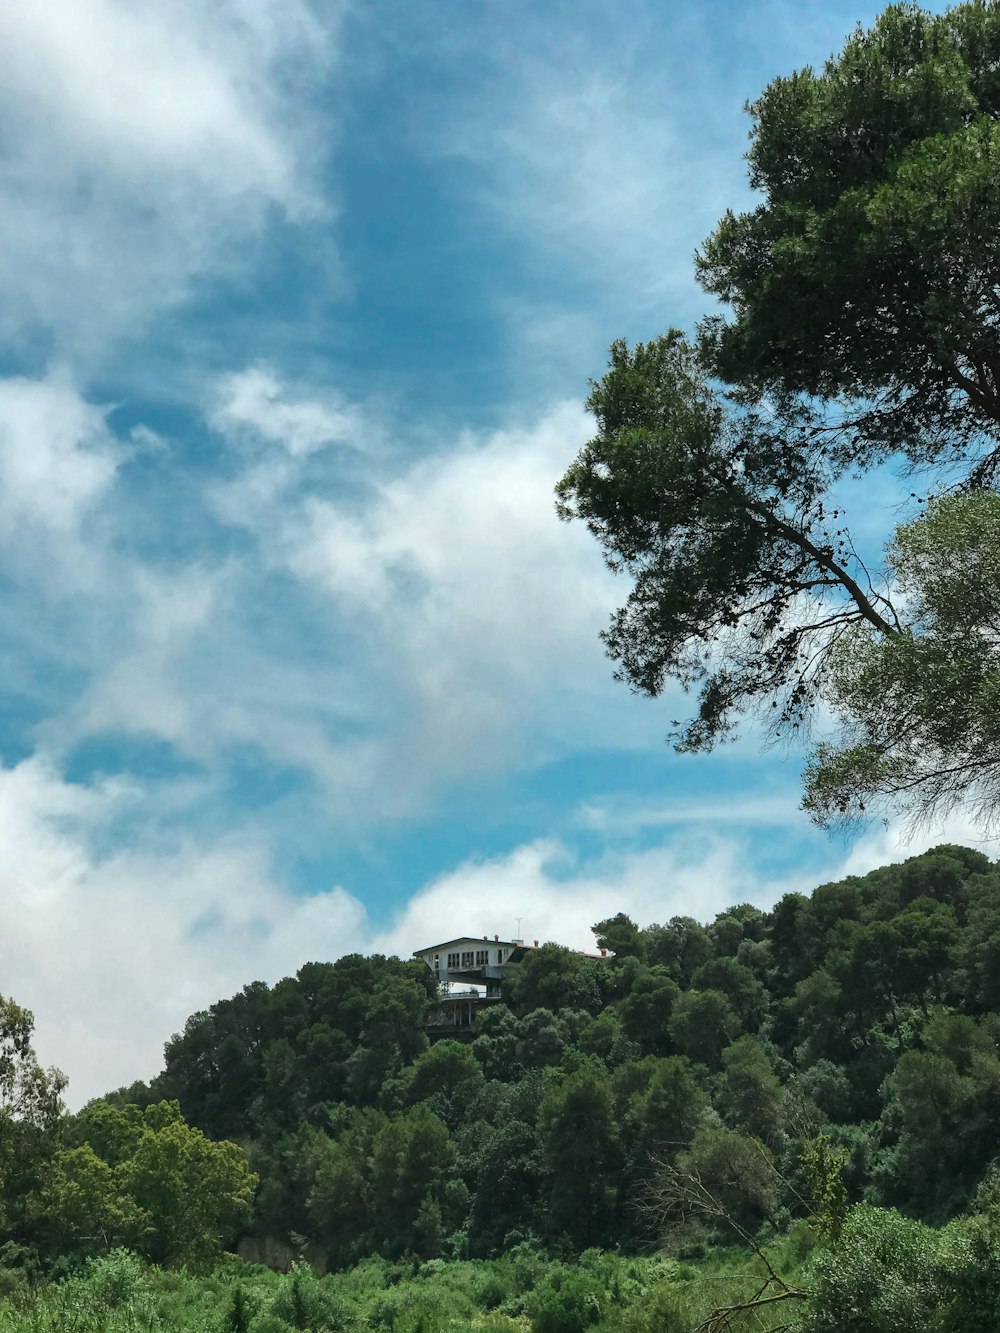 green trees under white clouds and blue sky during daytime